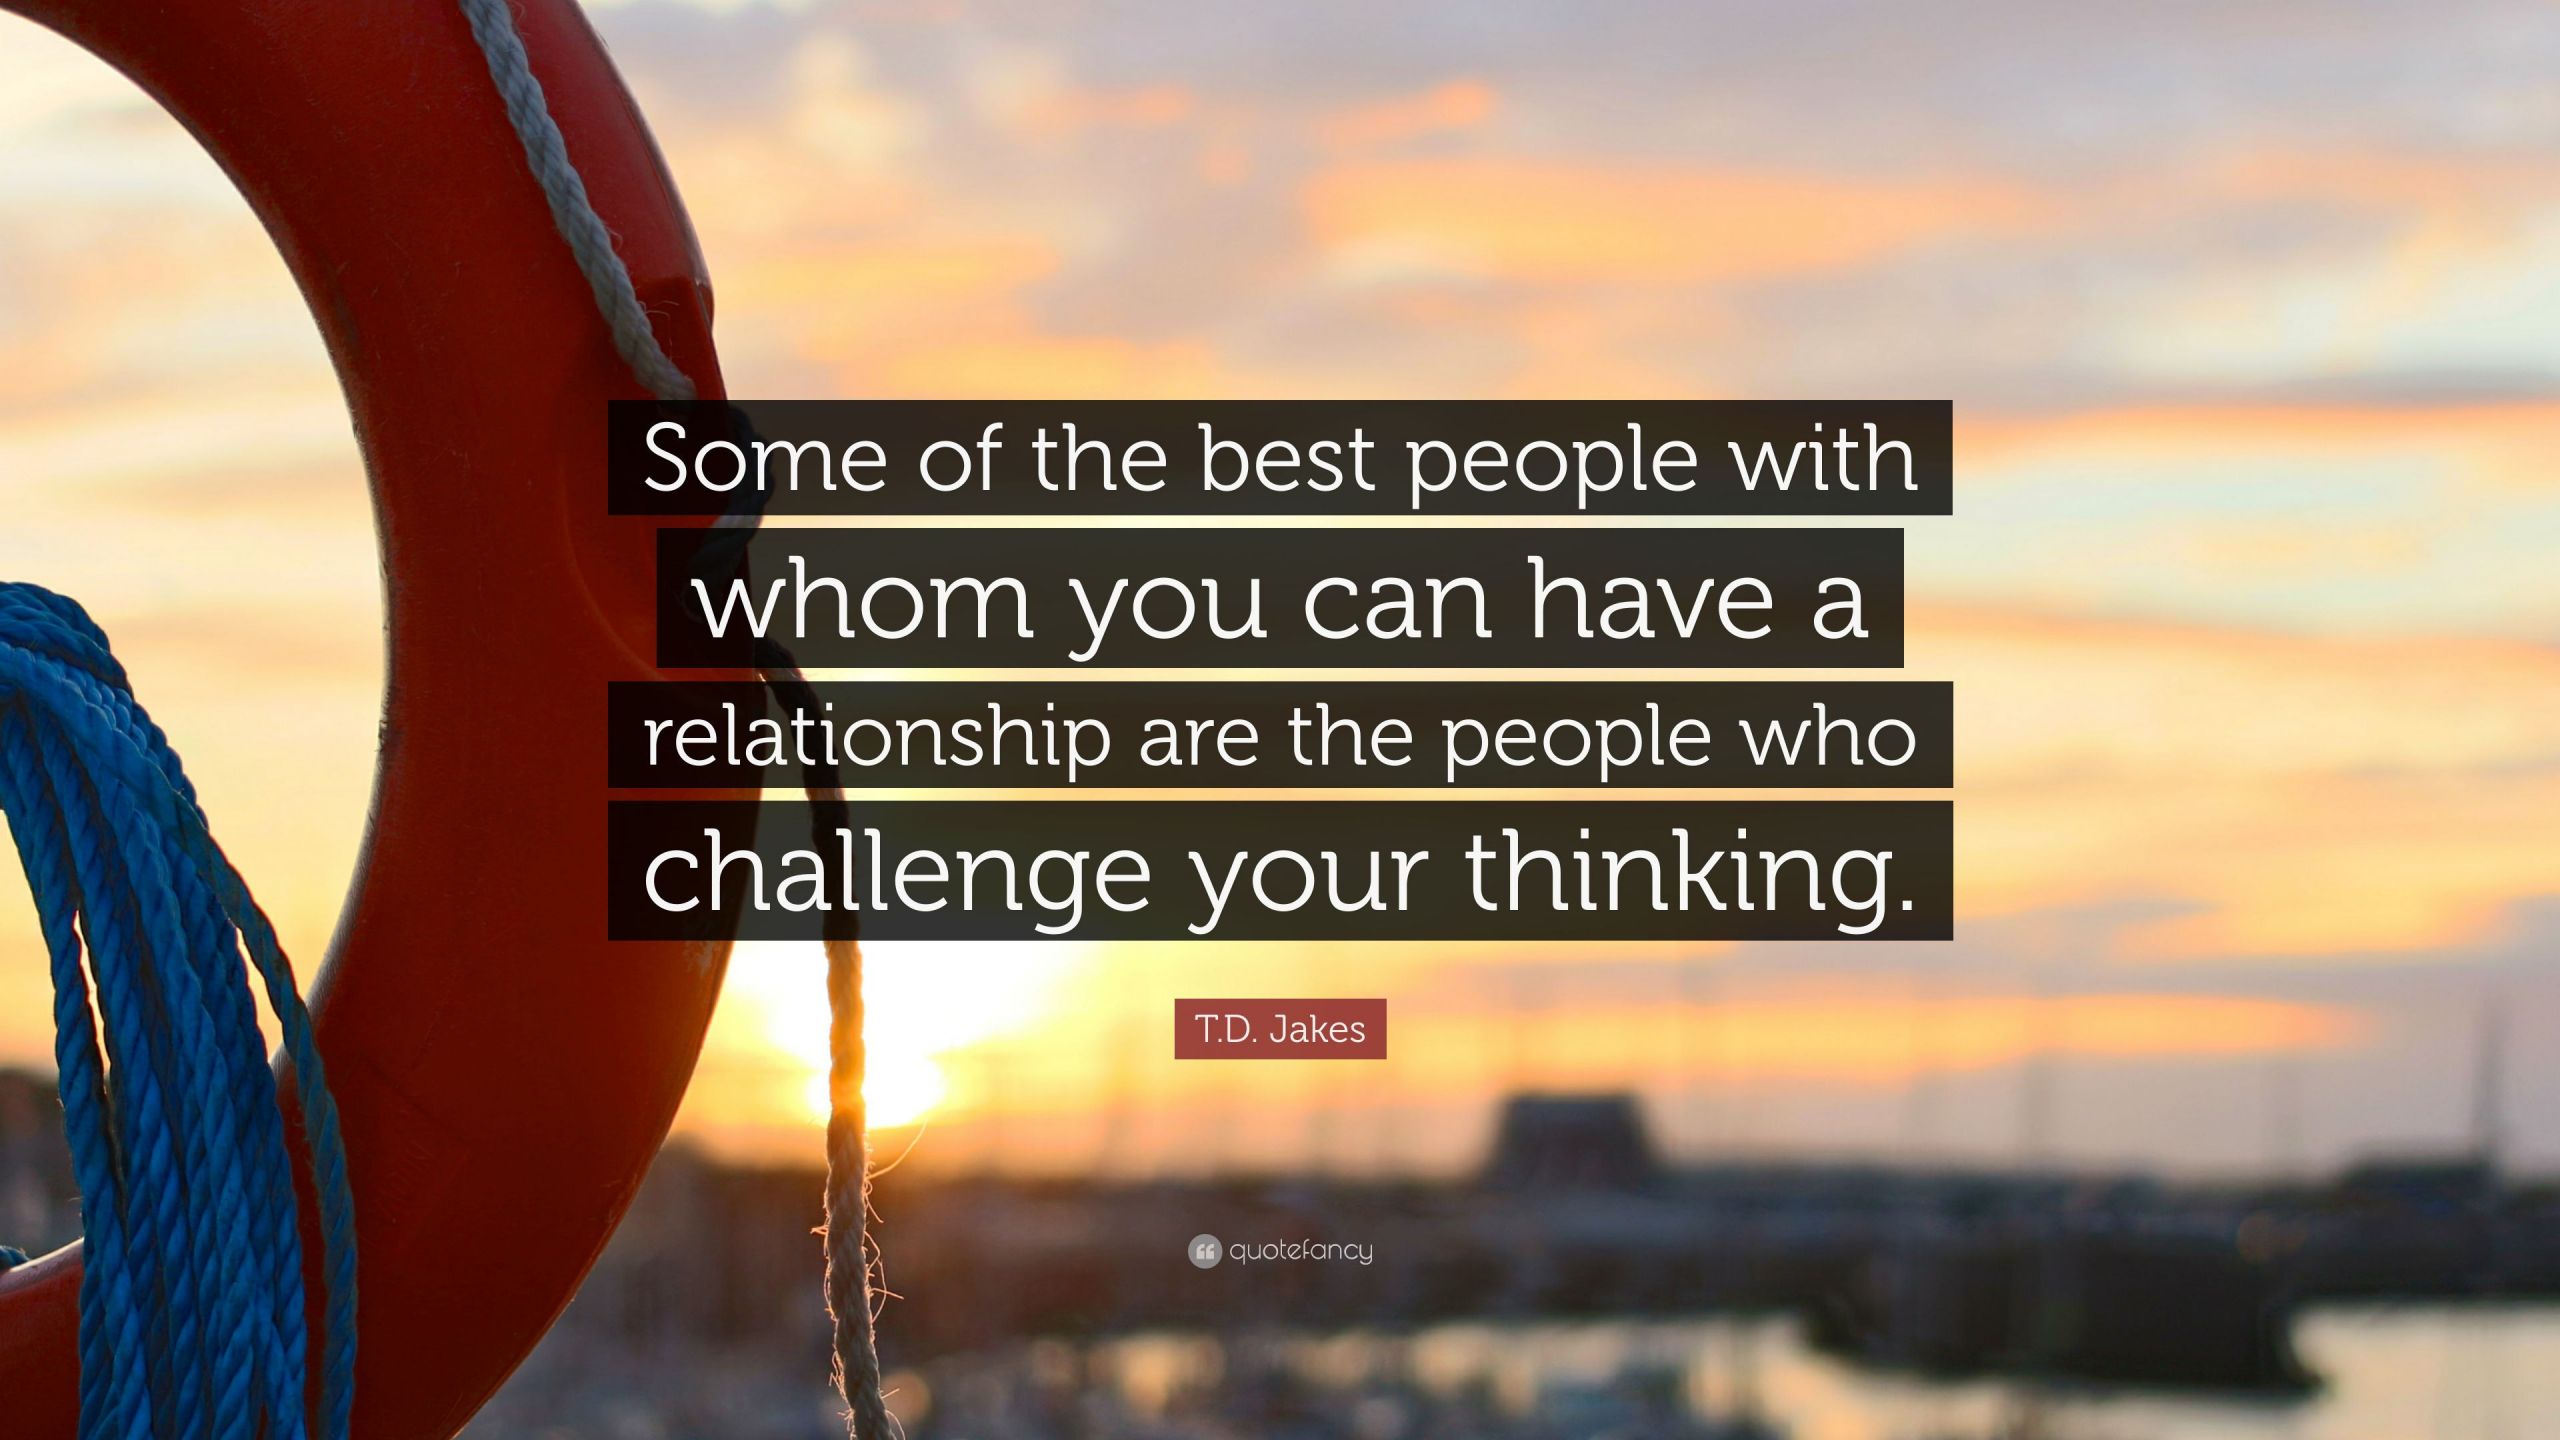 T.D Jakes Quotes On Relationships
 T D Jakes Quote “Some of the best people with whom you